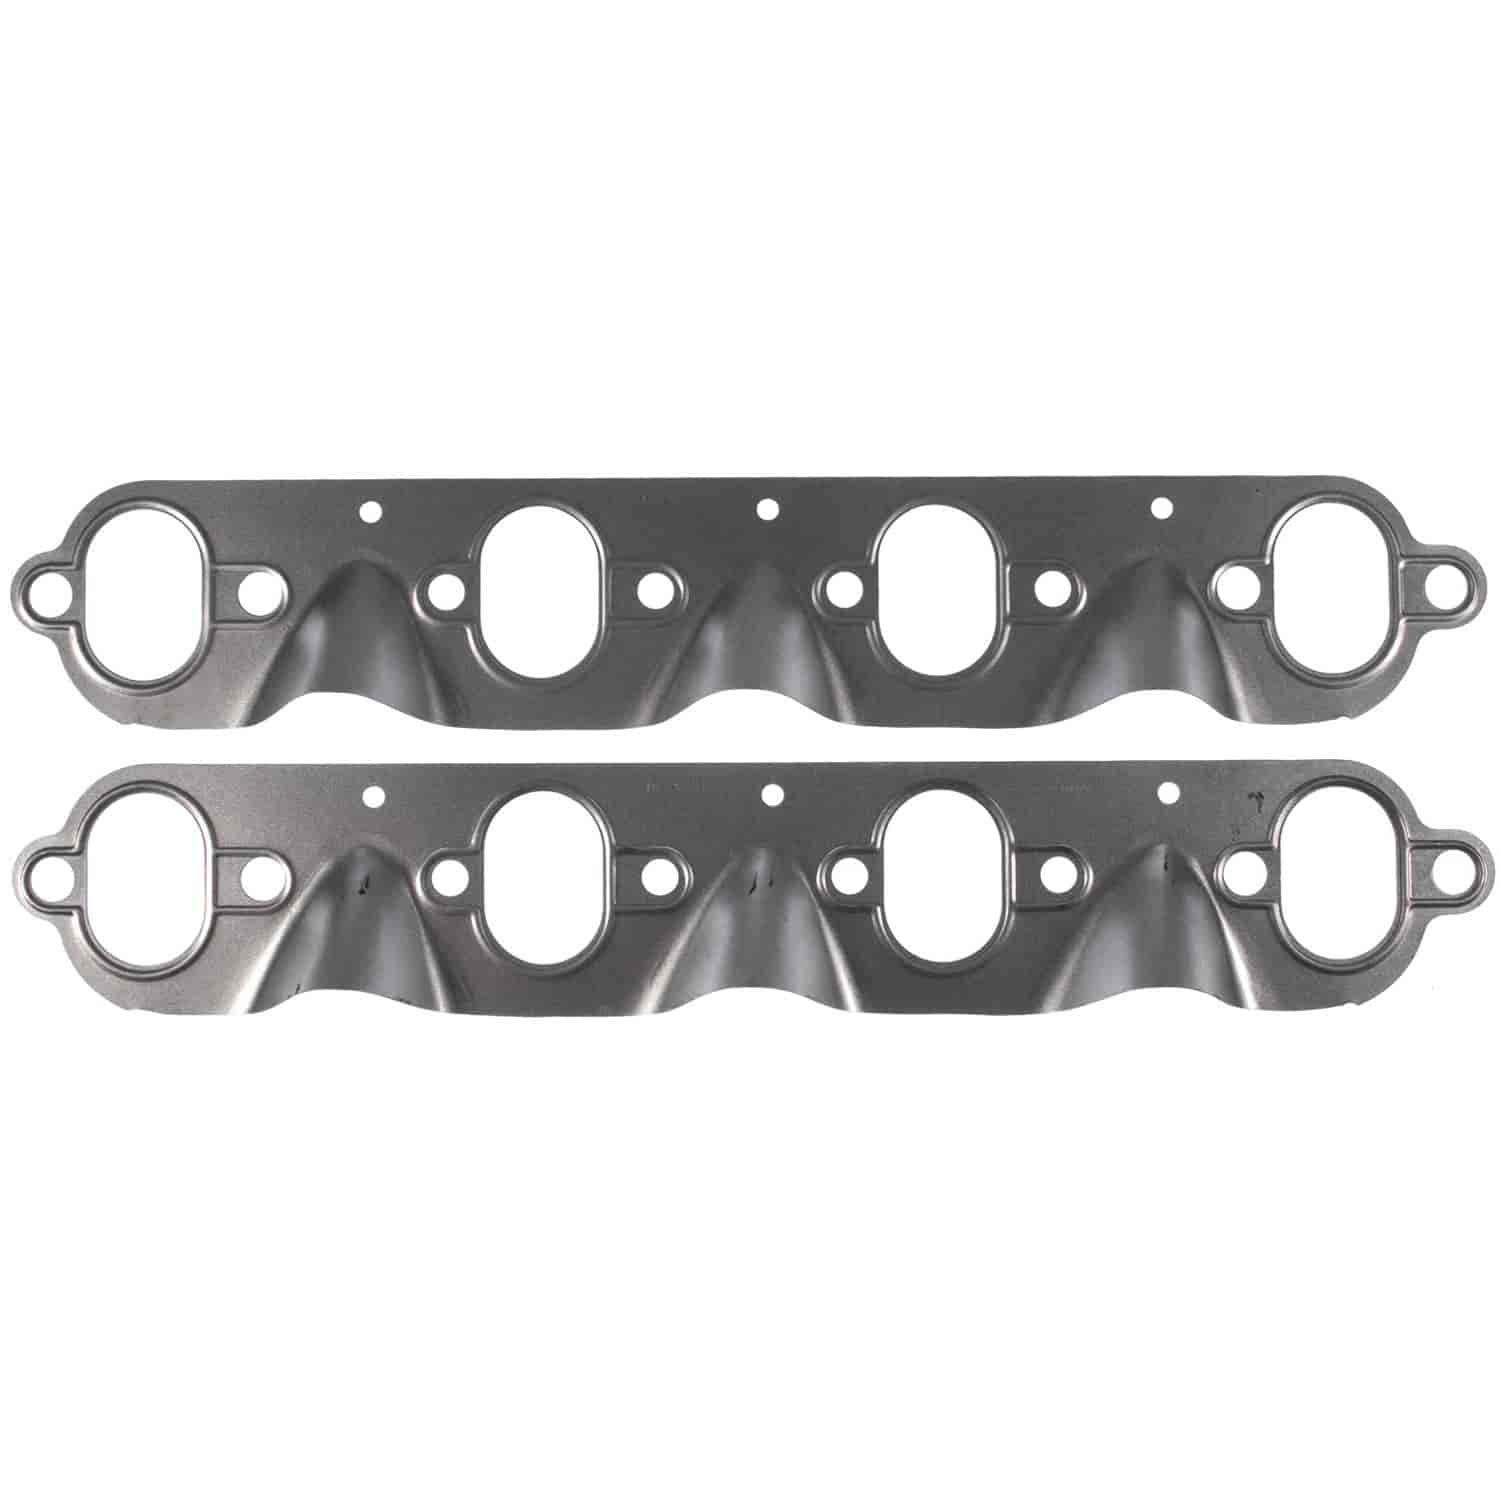 Exhaust Manifold Gasket Set 1980-1998 Ford 370/429 (6.1/7.0L)